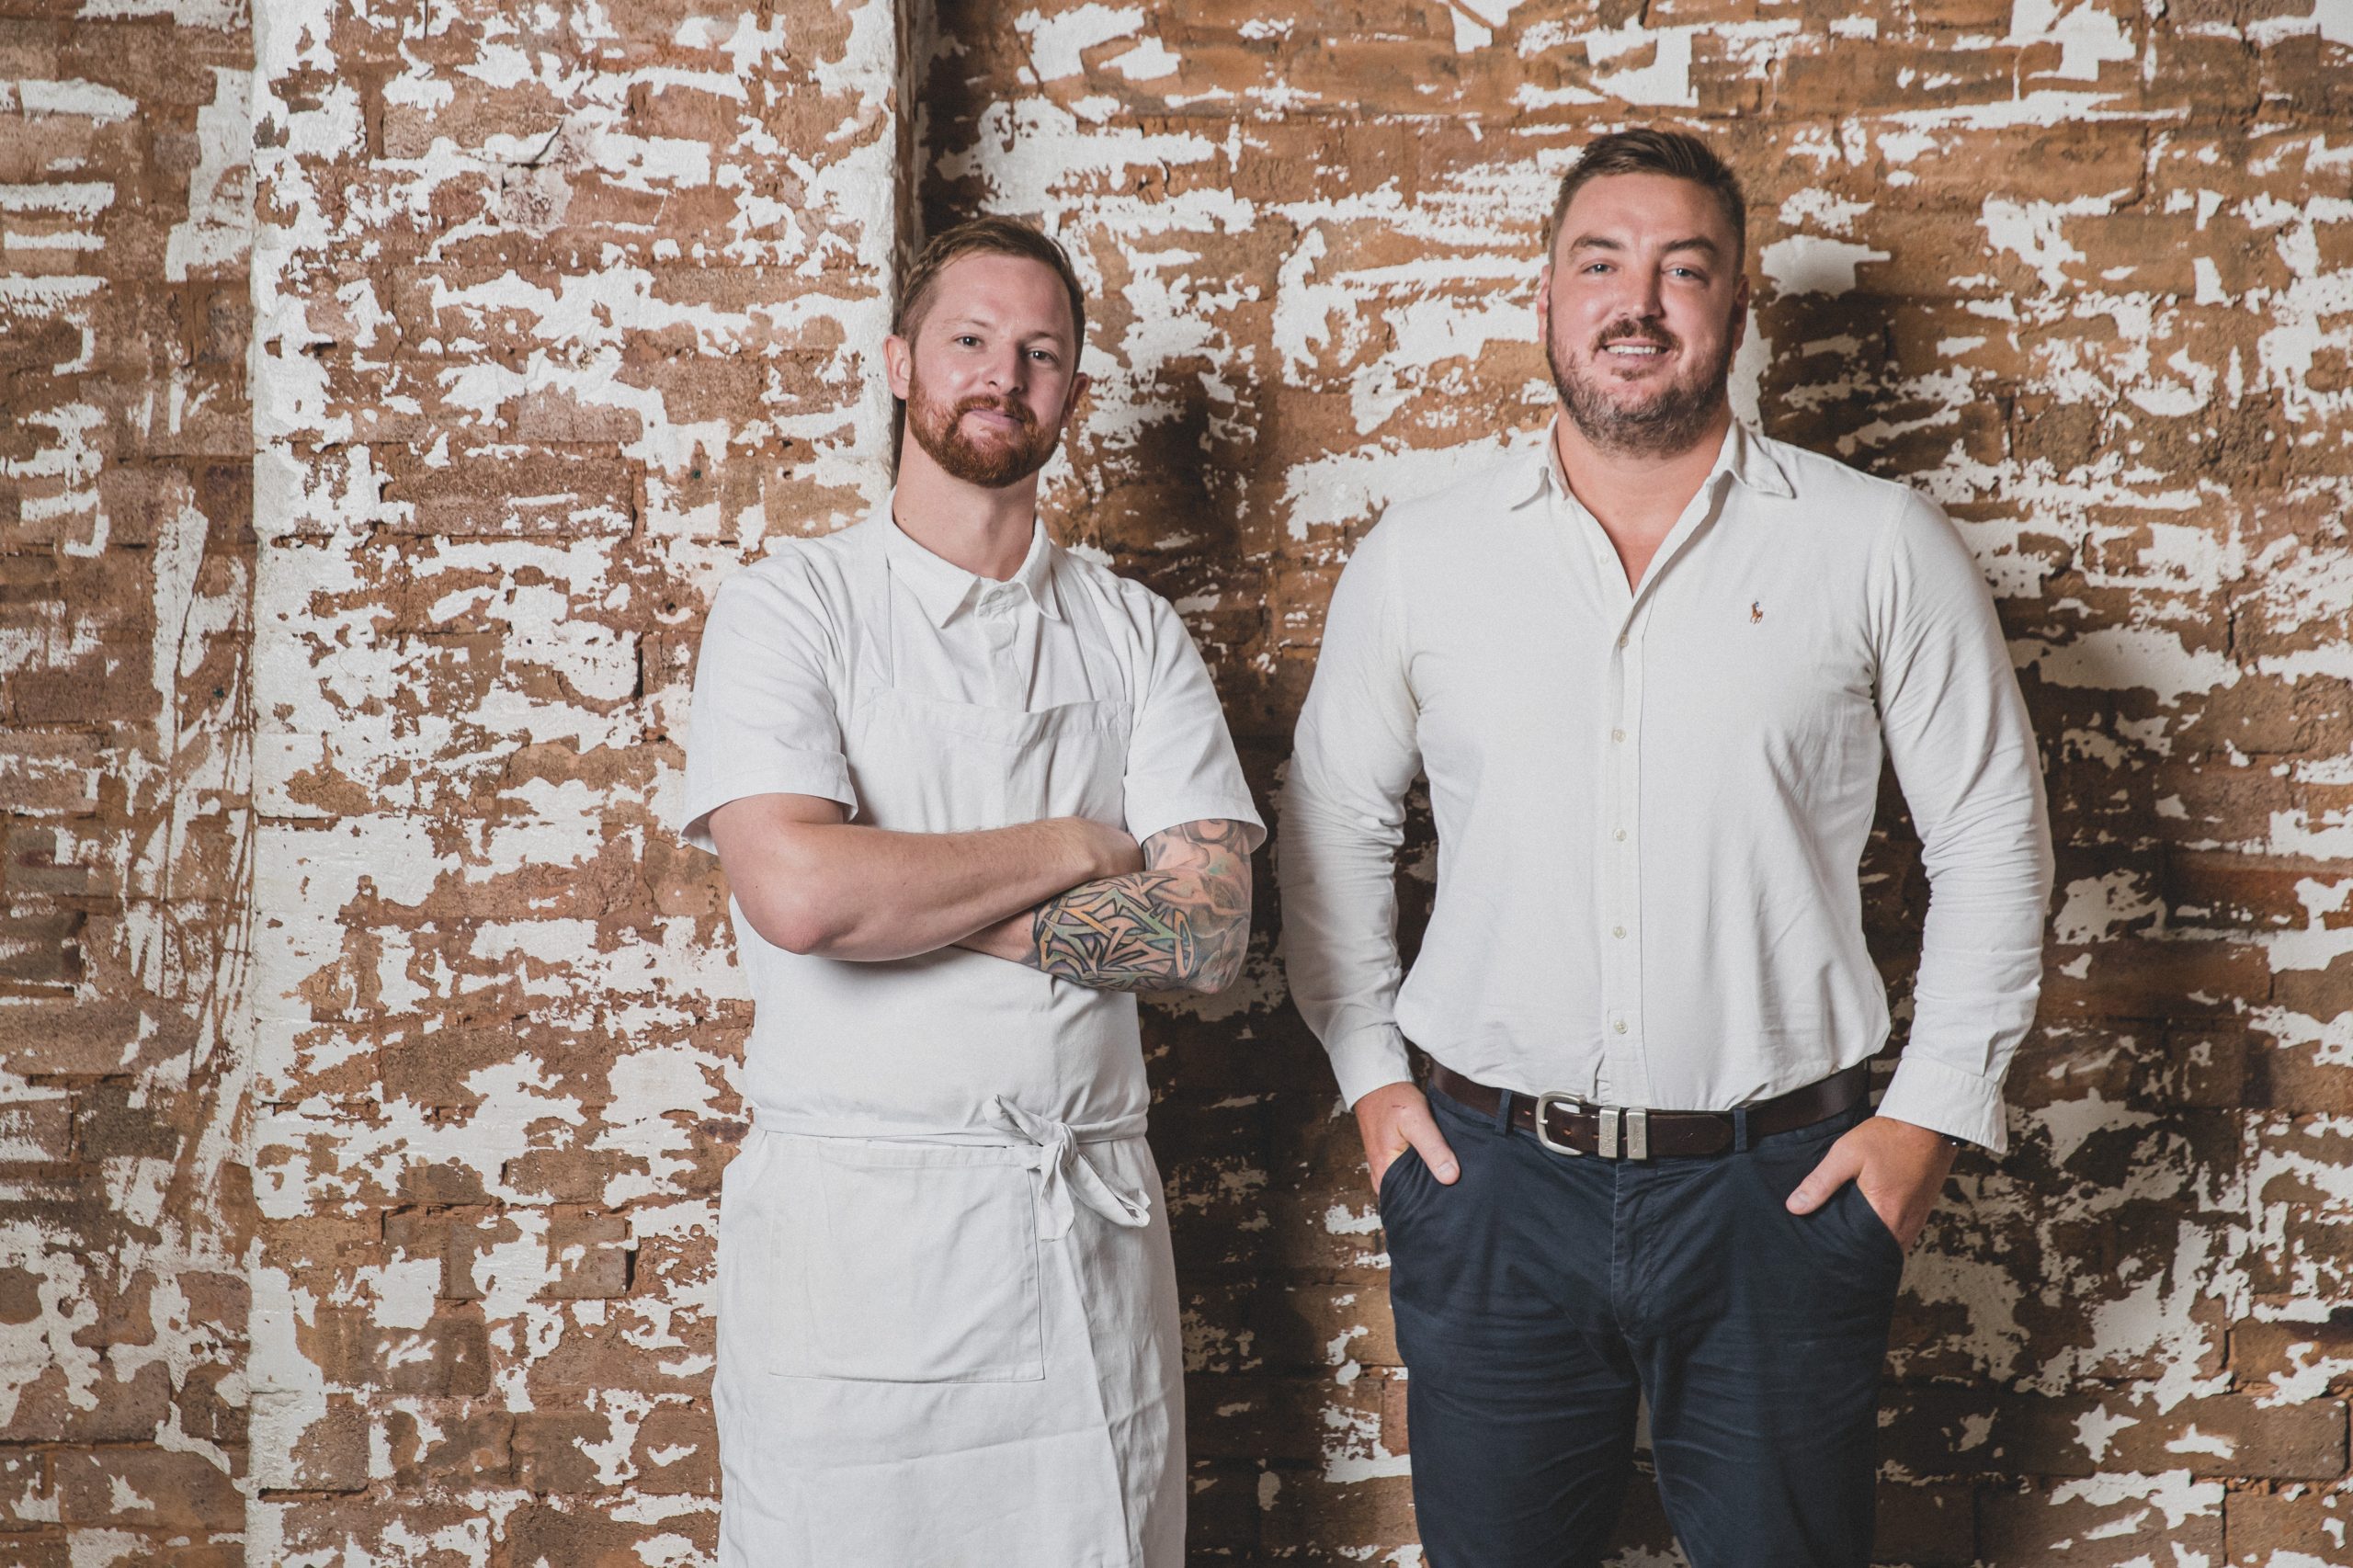 Image of Jacksons on George's head chef Steven Sinclair and Publican Mike Broome standing together in front of a brick wall.